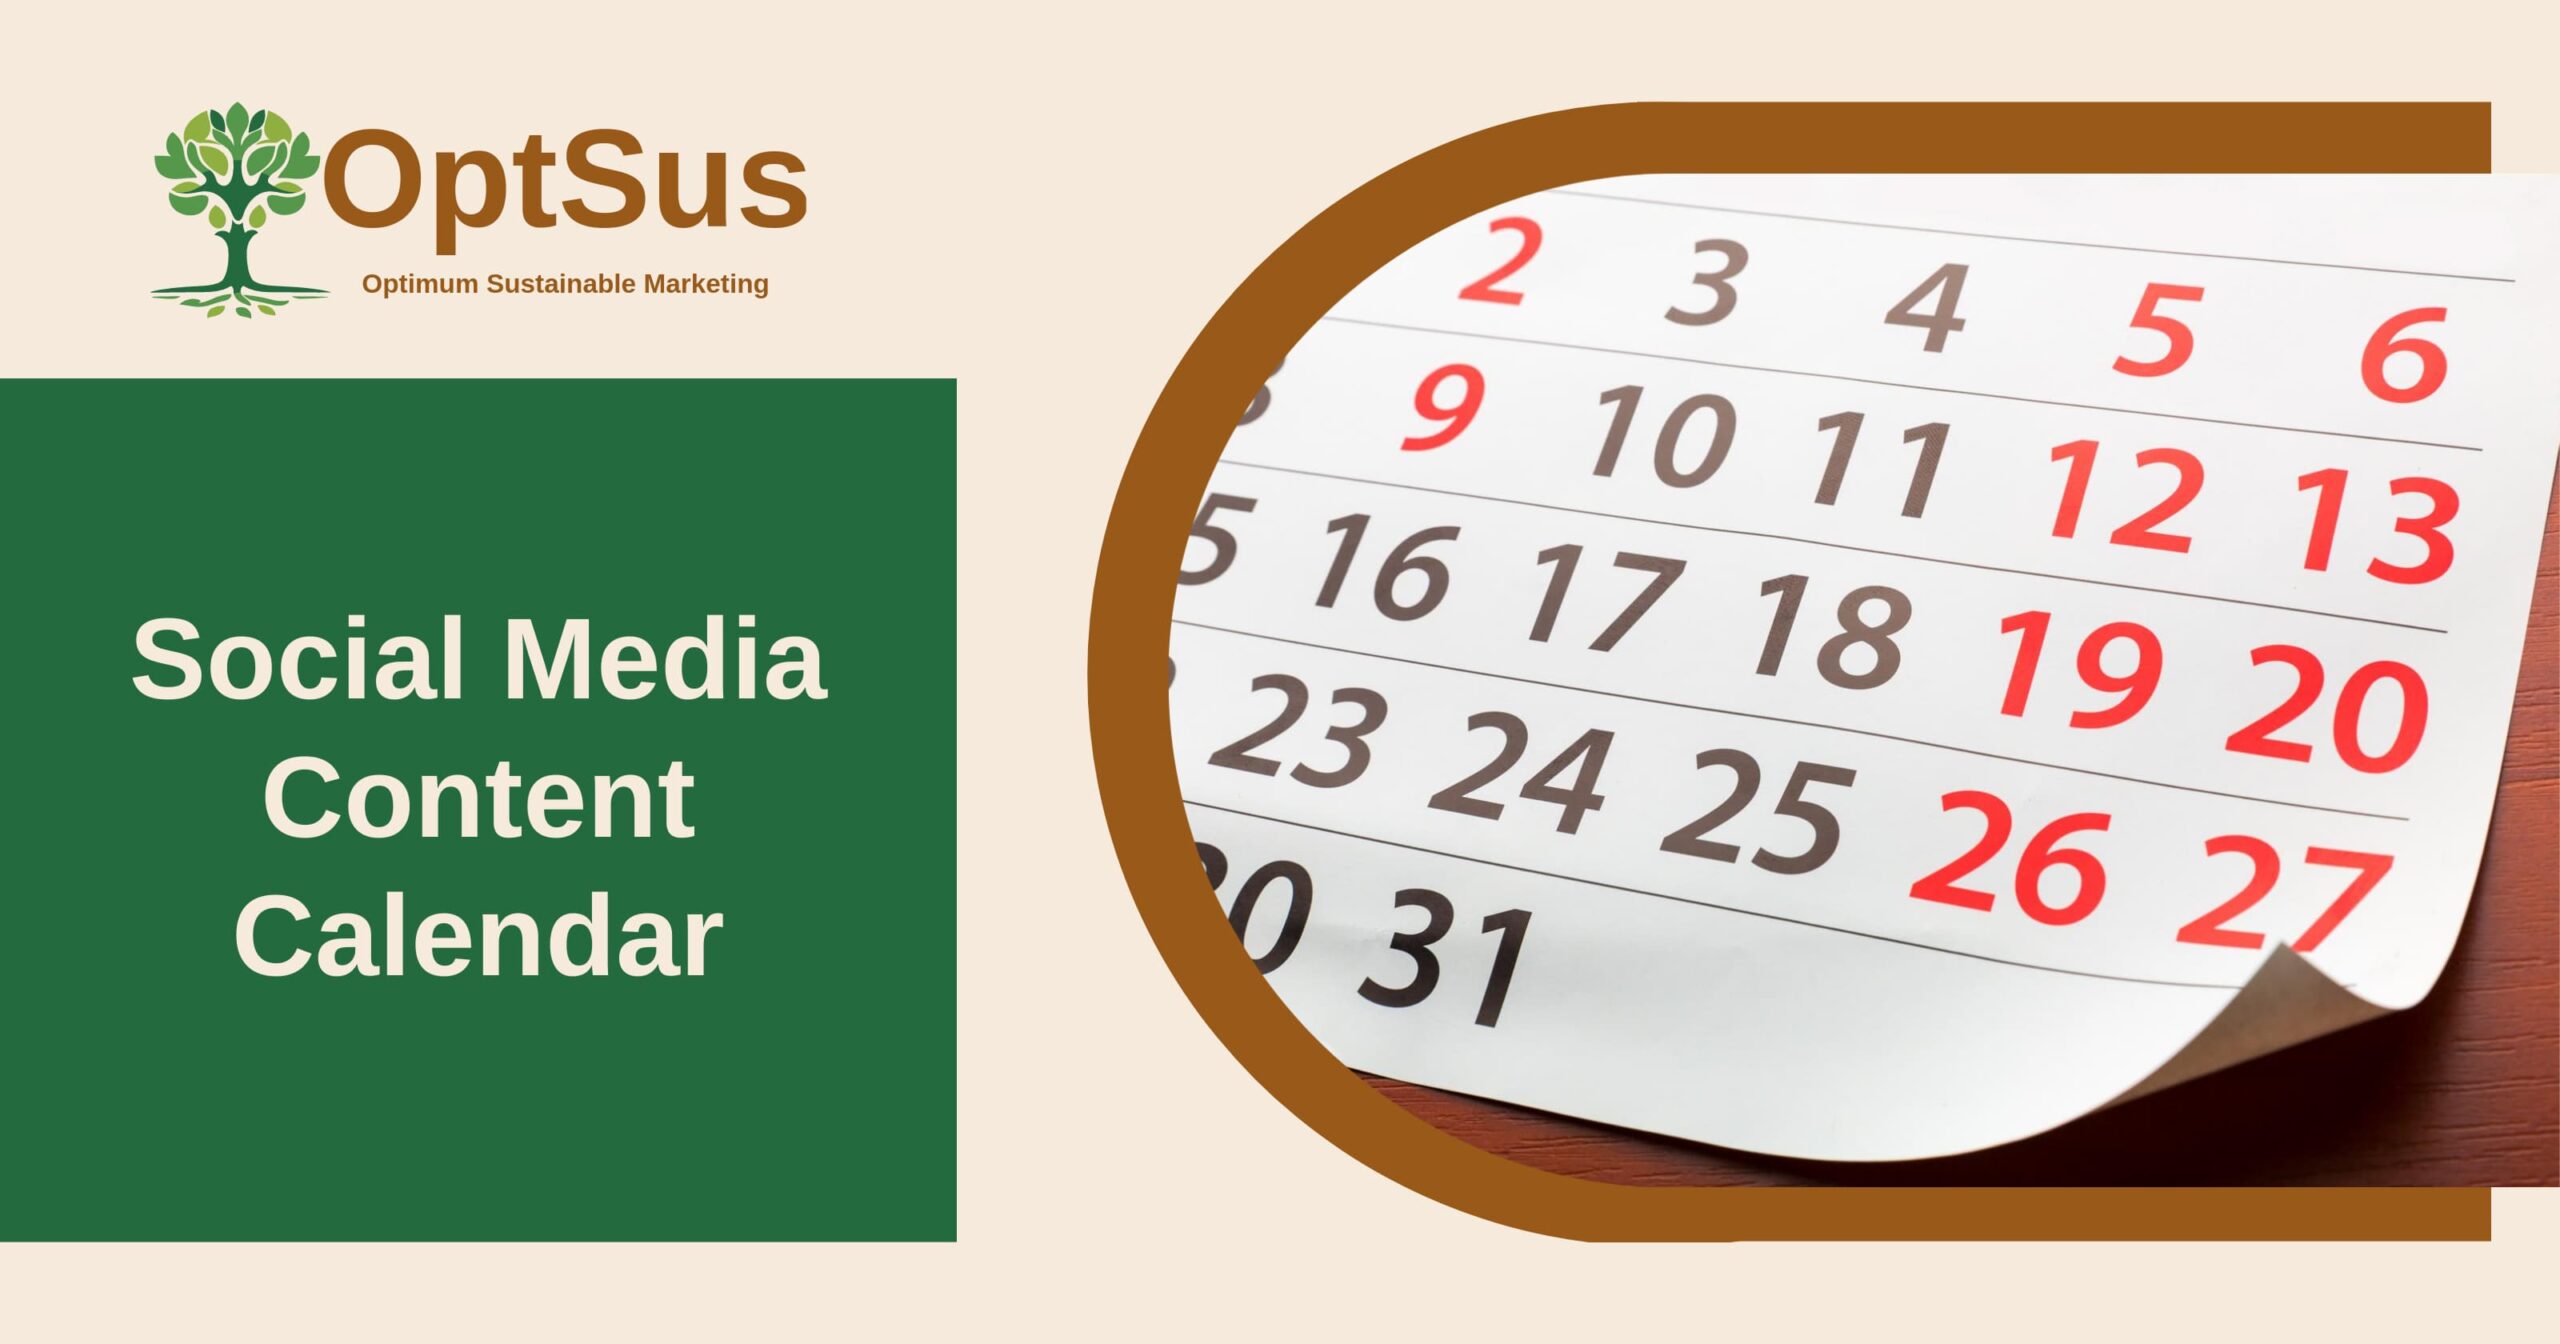 Blog post about social media content calendar with image of a calendar.